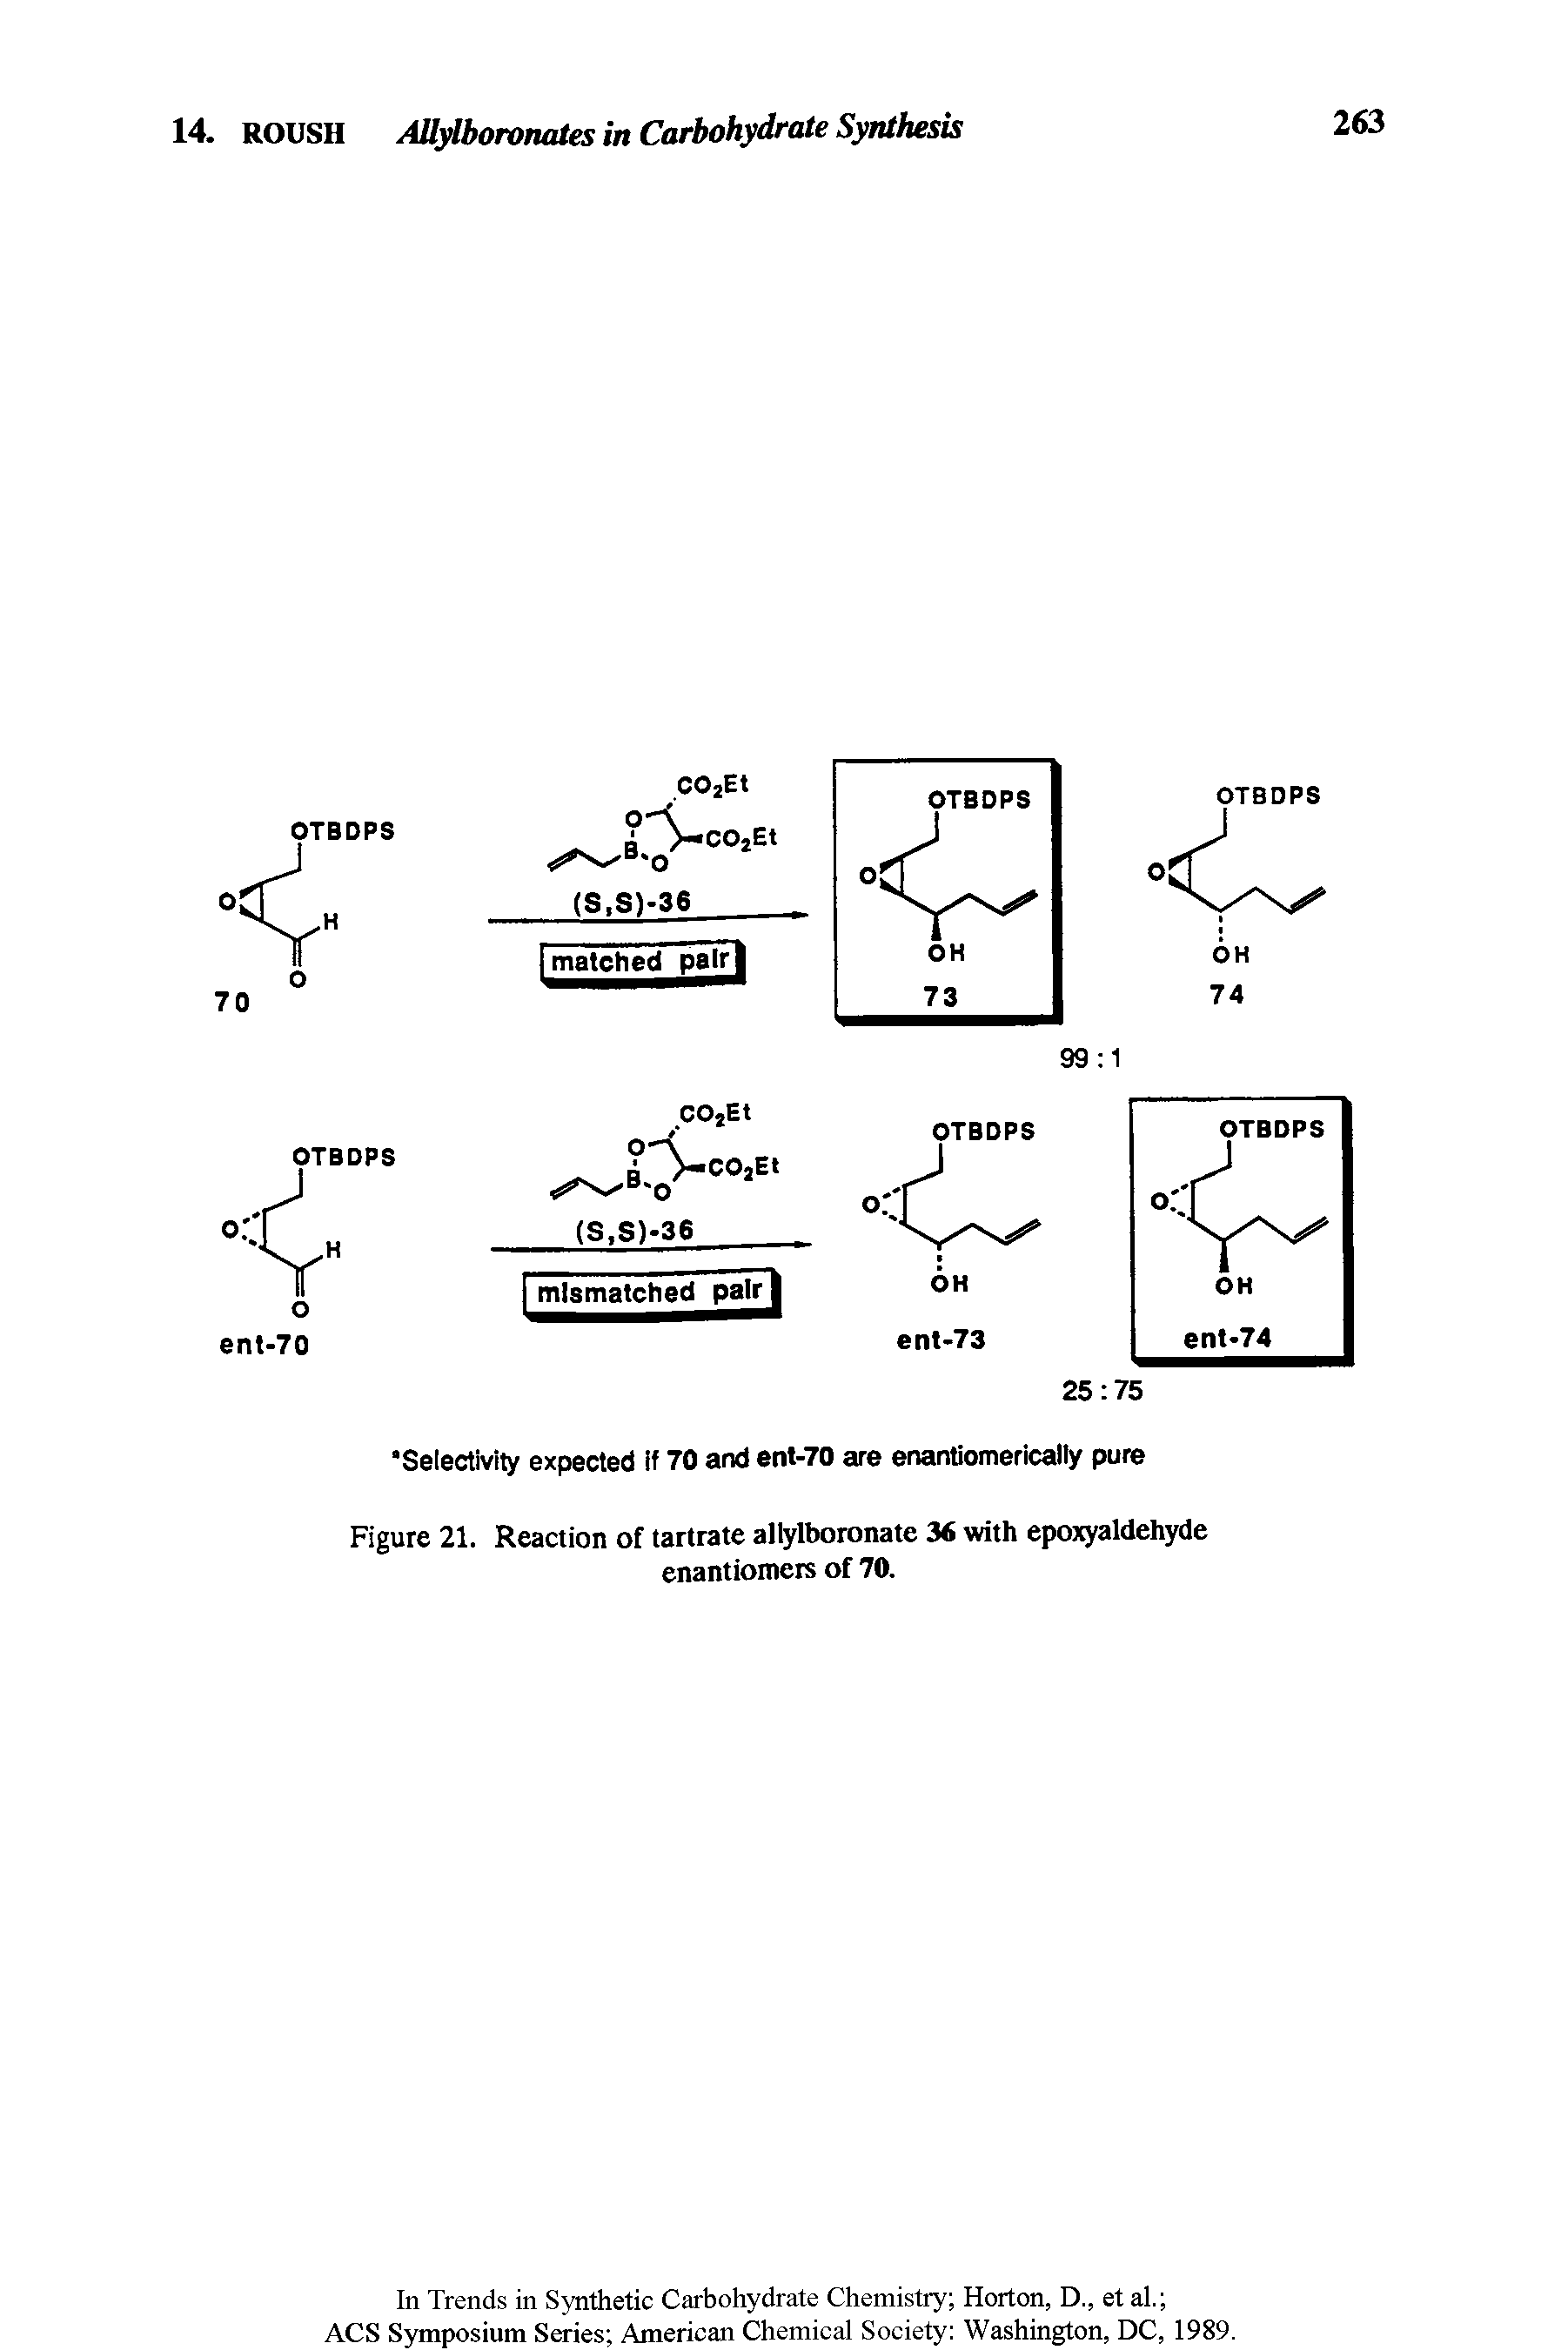 Figure 21. Reaction of tartrate allylboronate 36 with epojQ aldehyde enantiomers of 70.